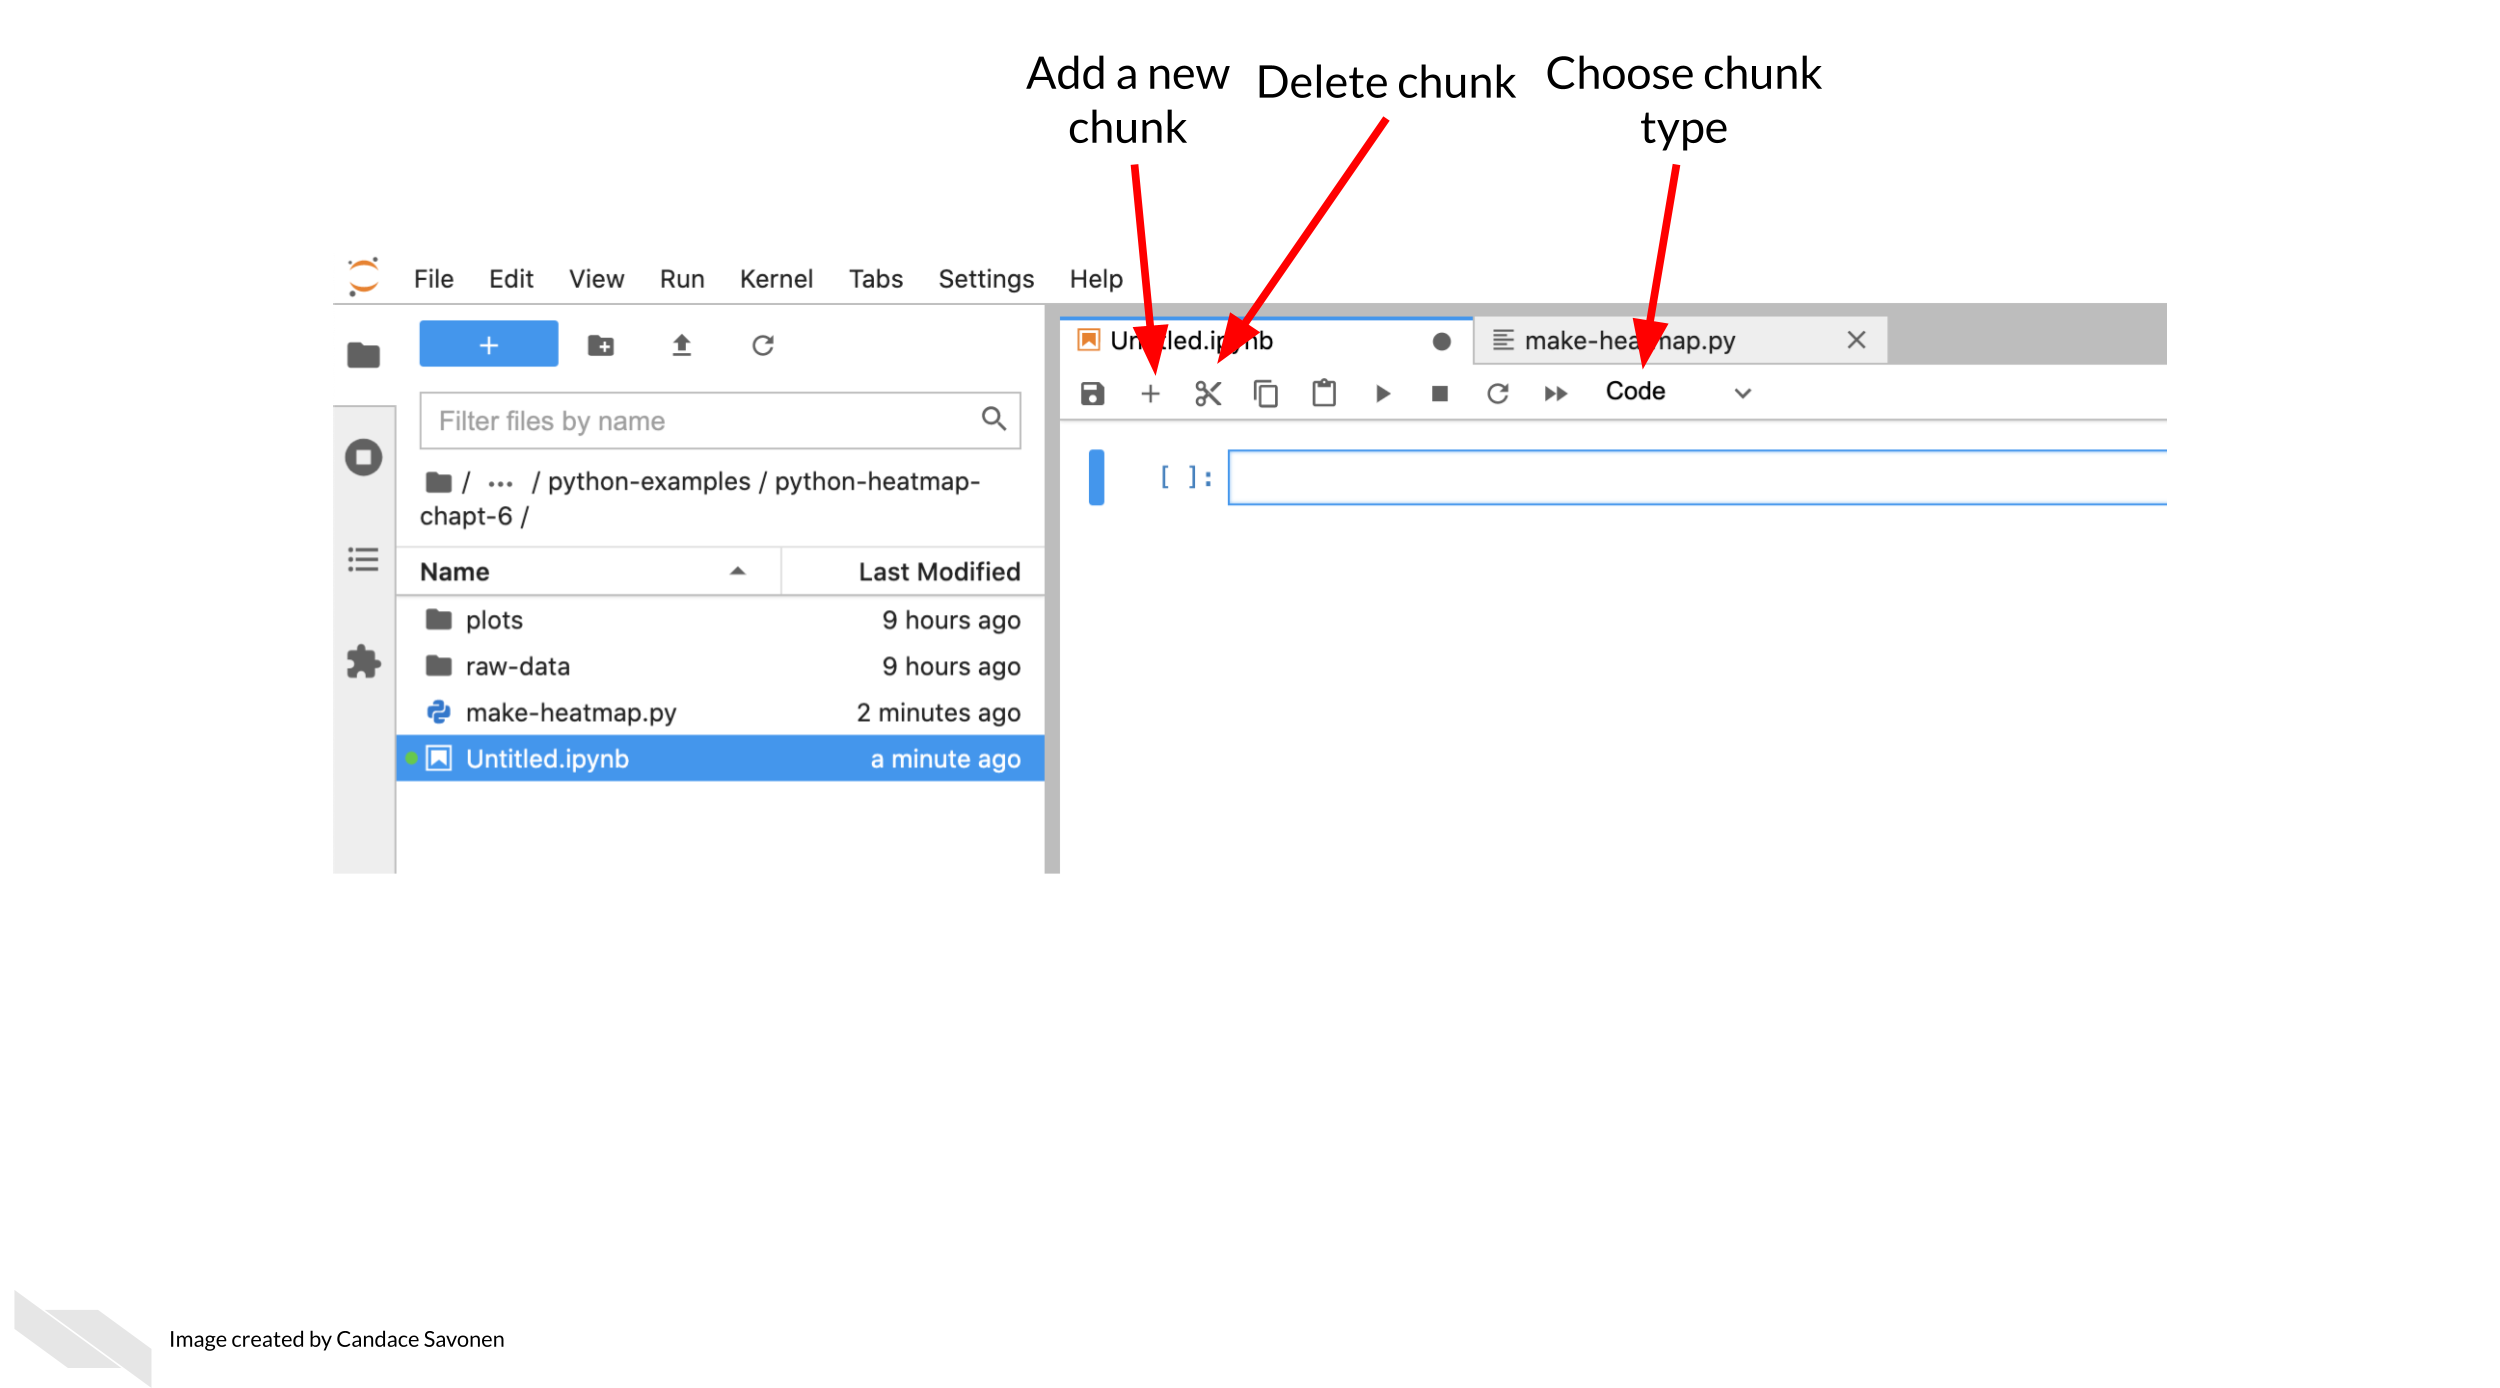 The Jupyter interface has a ‘add a new chunk’ button, a delete chunk button, and a dropdown menu that allows you to choose the chunk type you’d like to add. 